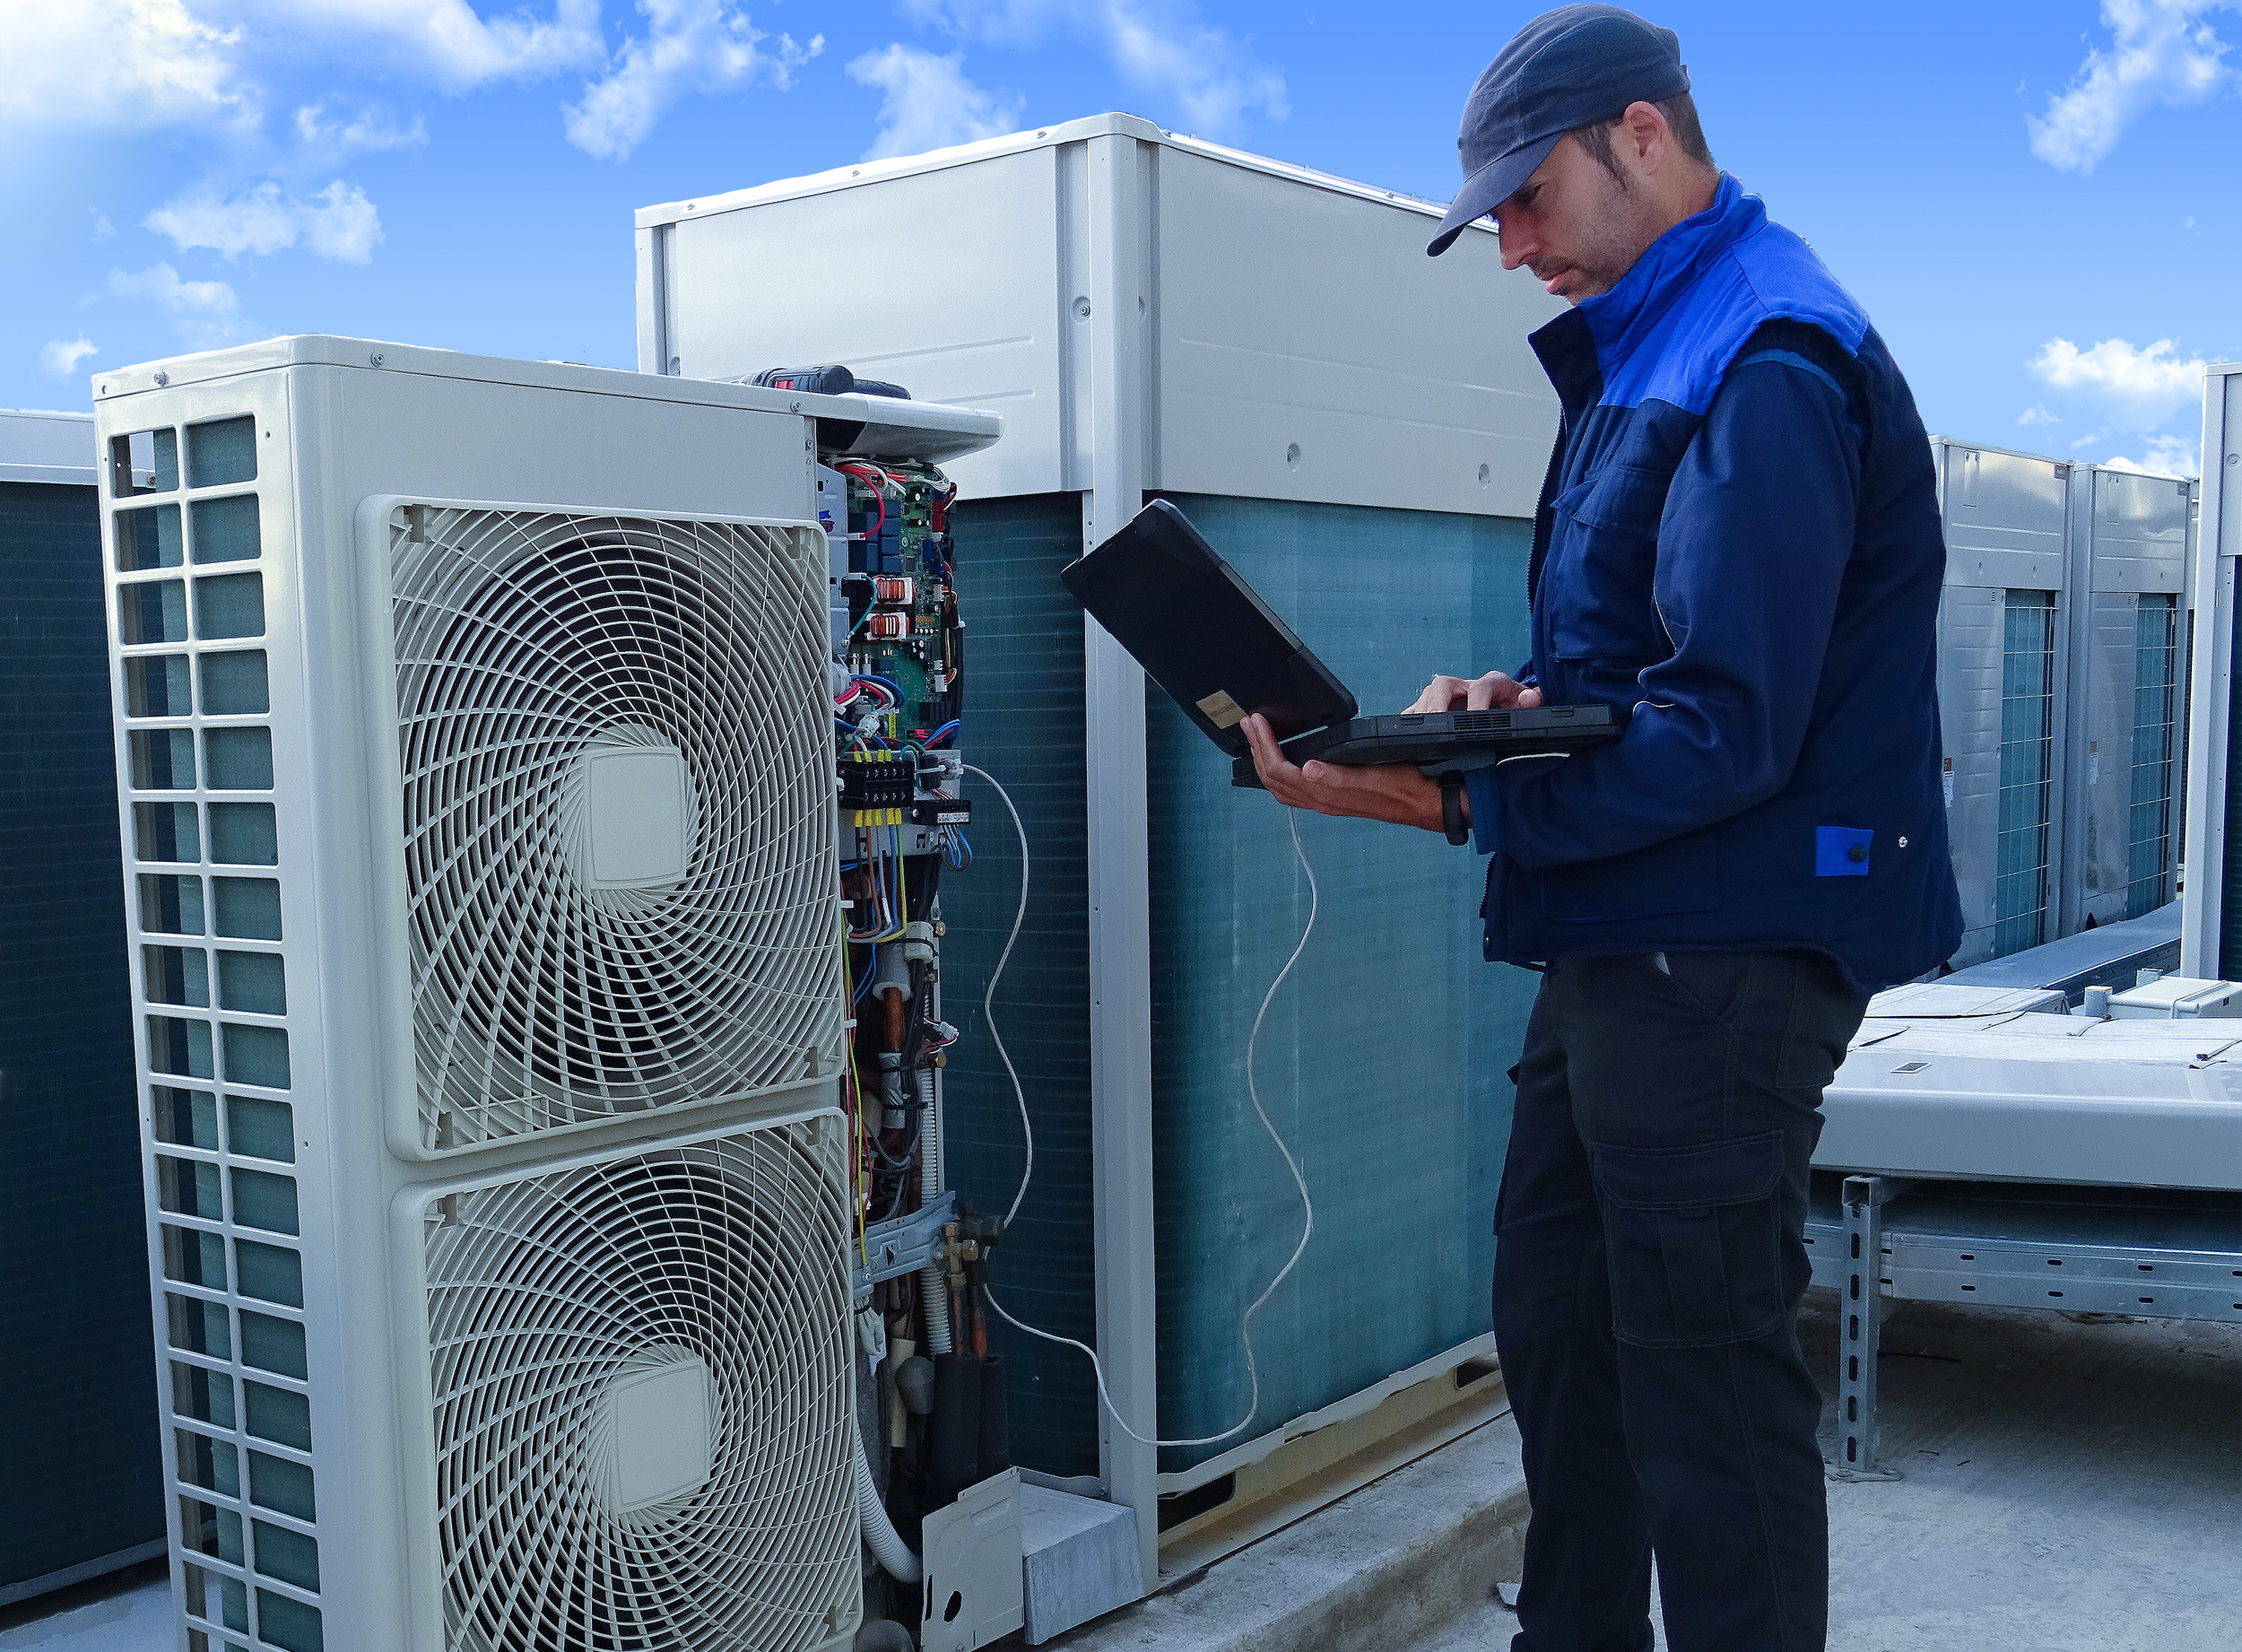 air conditioning technician making a diagnosis of an industrial air conditioning unit with a laptop next to other VRV condenser units on a rooftop in a sunny day